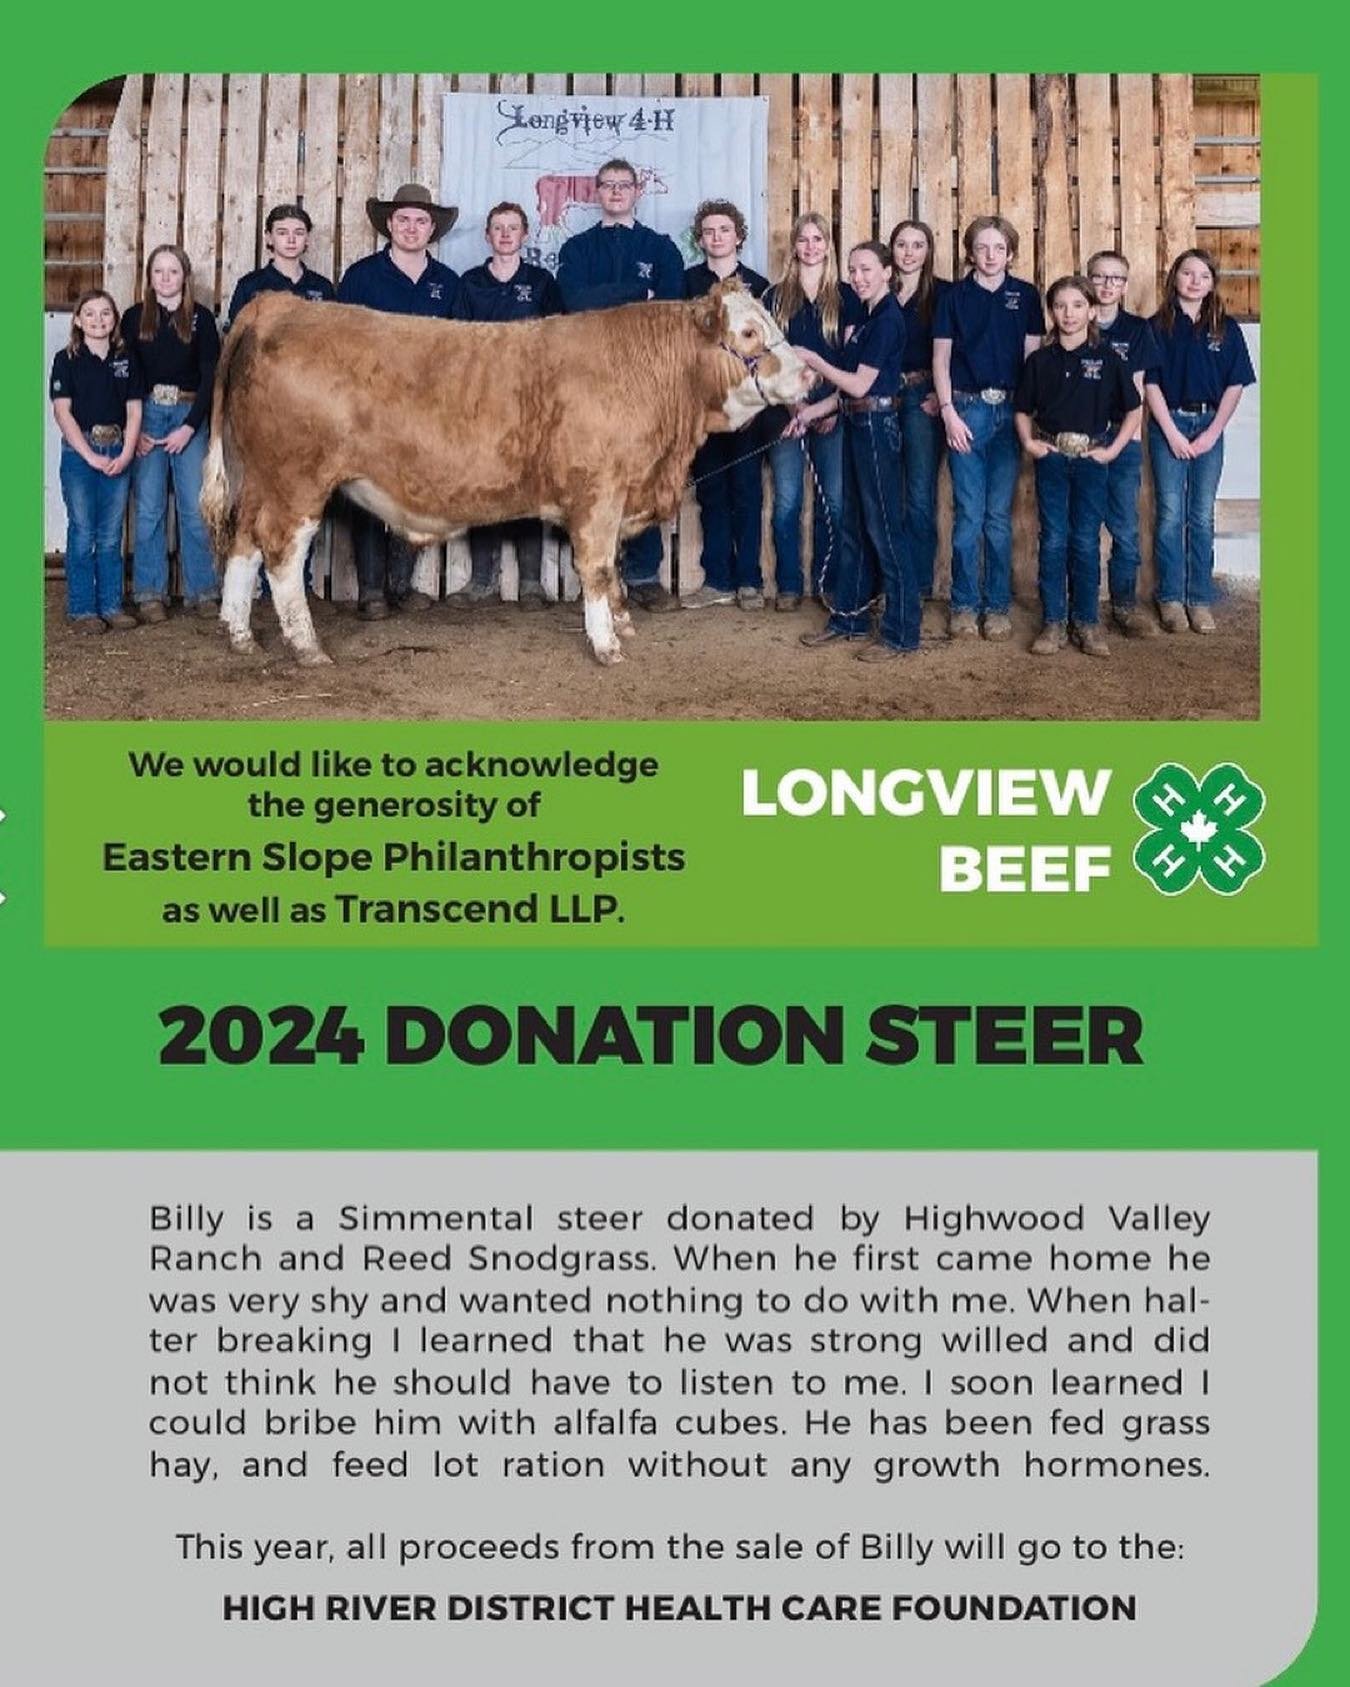 We are thrilled for our continued partnership with @longview4hbeef and we look forward to hearing more about Billy&rsquo;s journey. #staytuned 

Be sure to add this sale to your May long weekend plans. 

#hrhealthcarefoundation